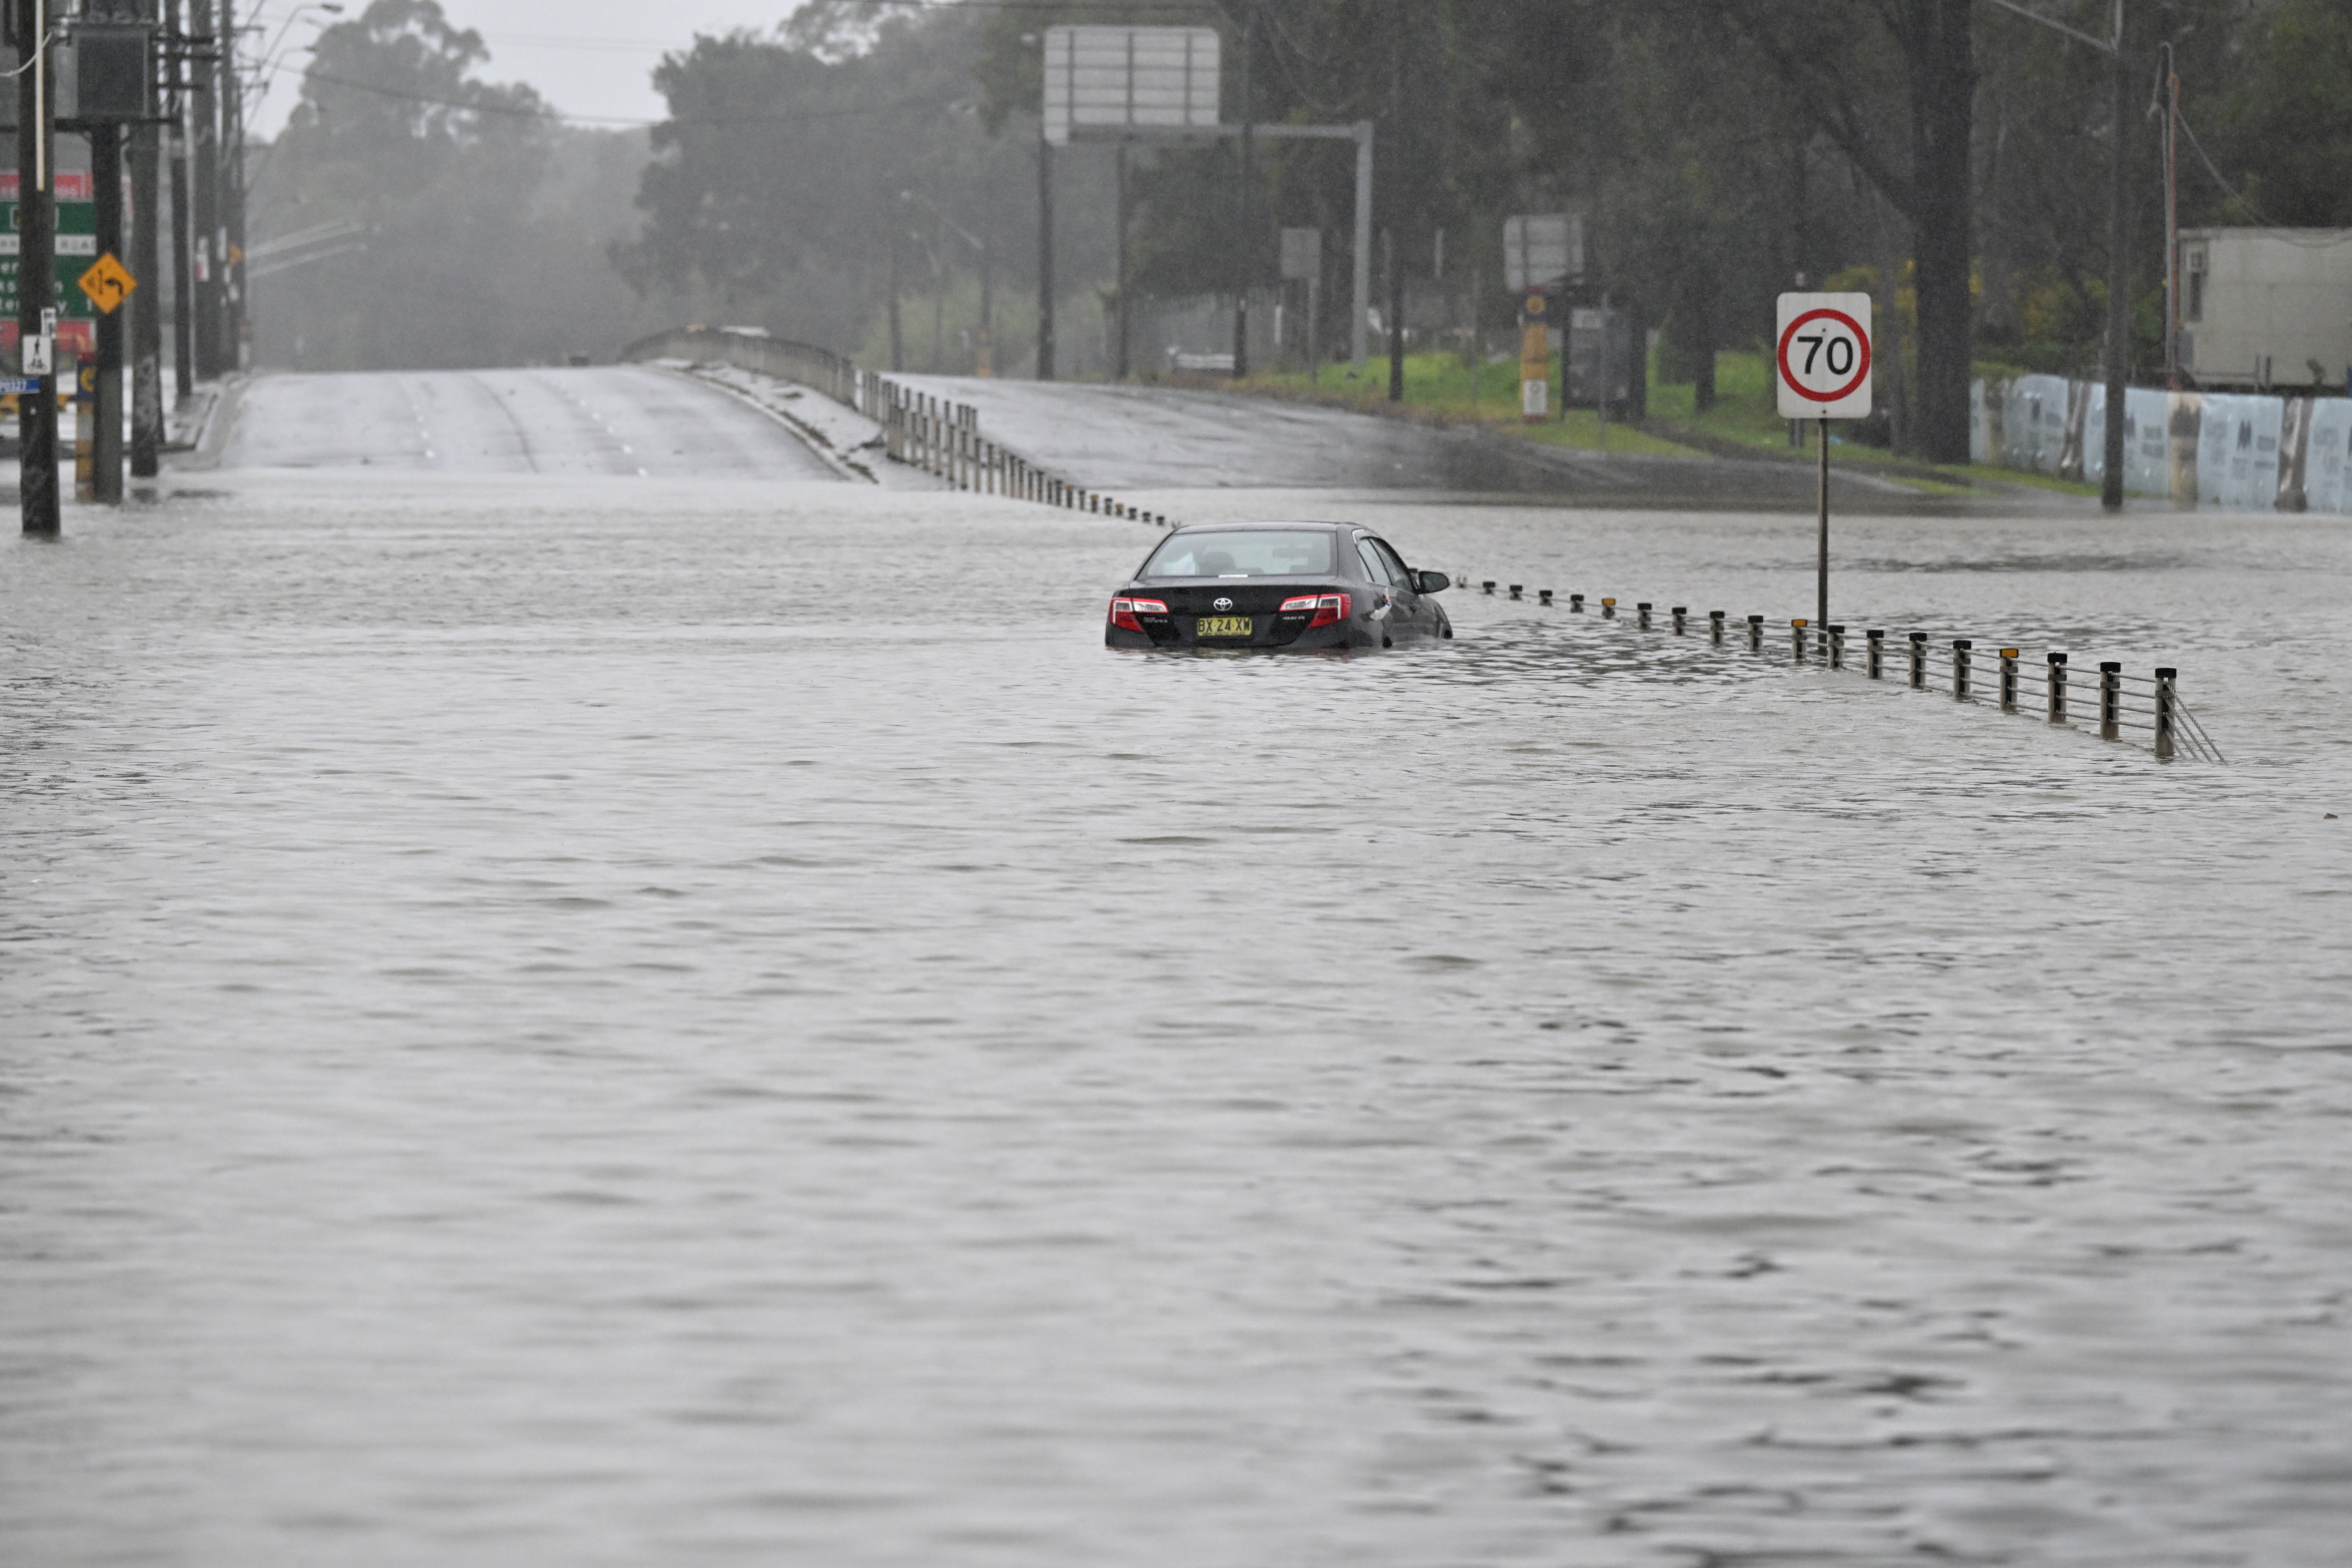 A car is seen abandoned in floodwaters on Newbridge Road in Chipping Norton in Western Sydney